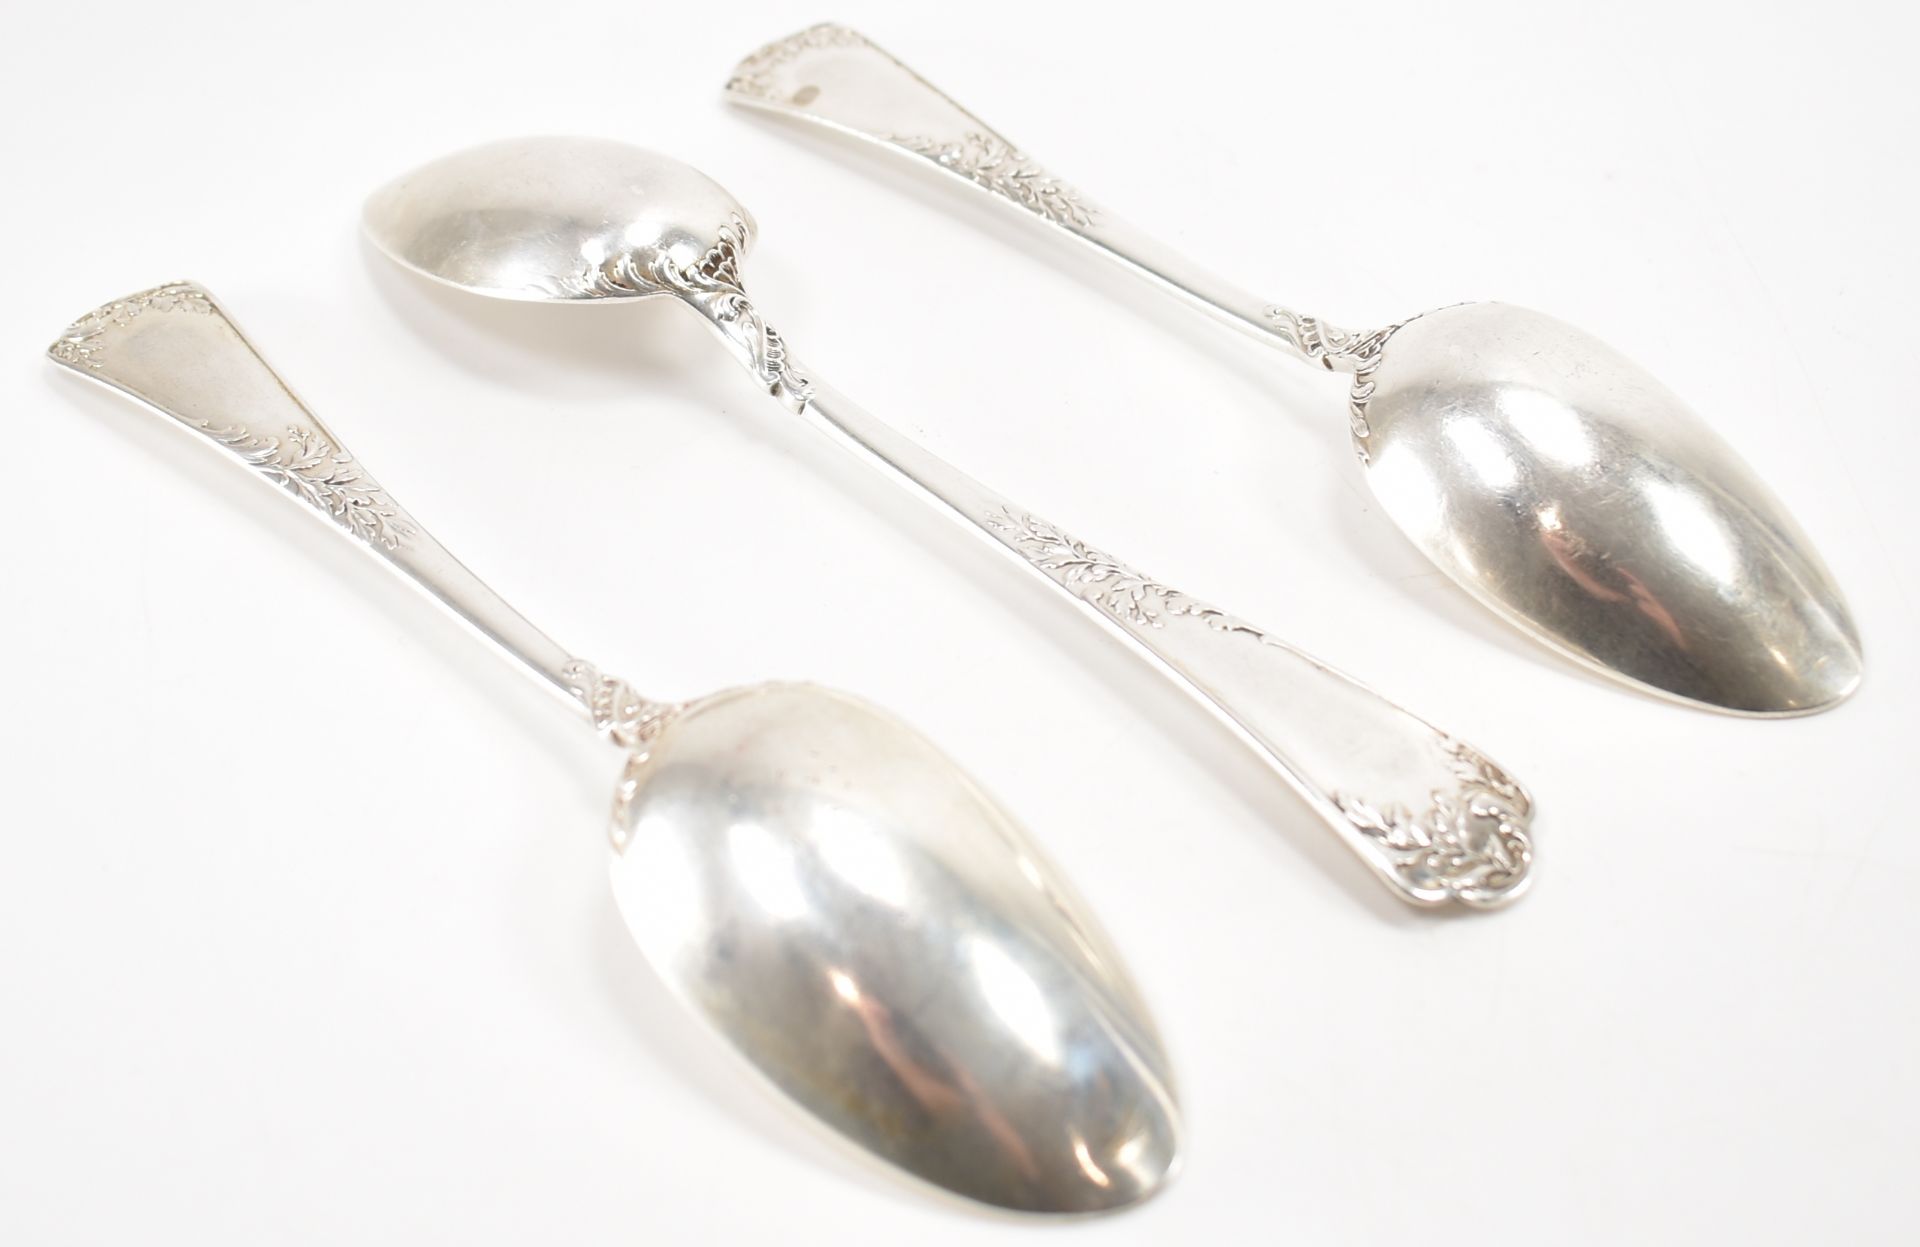 THREE ANTIQUE SILVER WHITE METAL SERVING SPOONS - Image 6 of 6